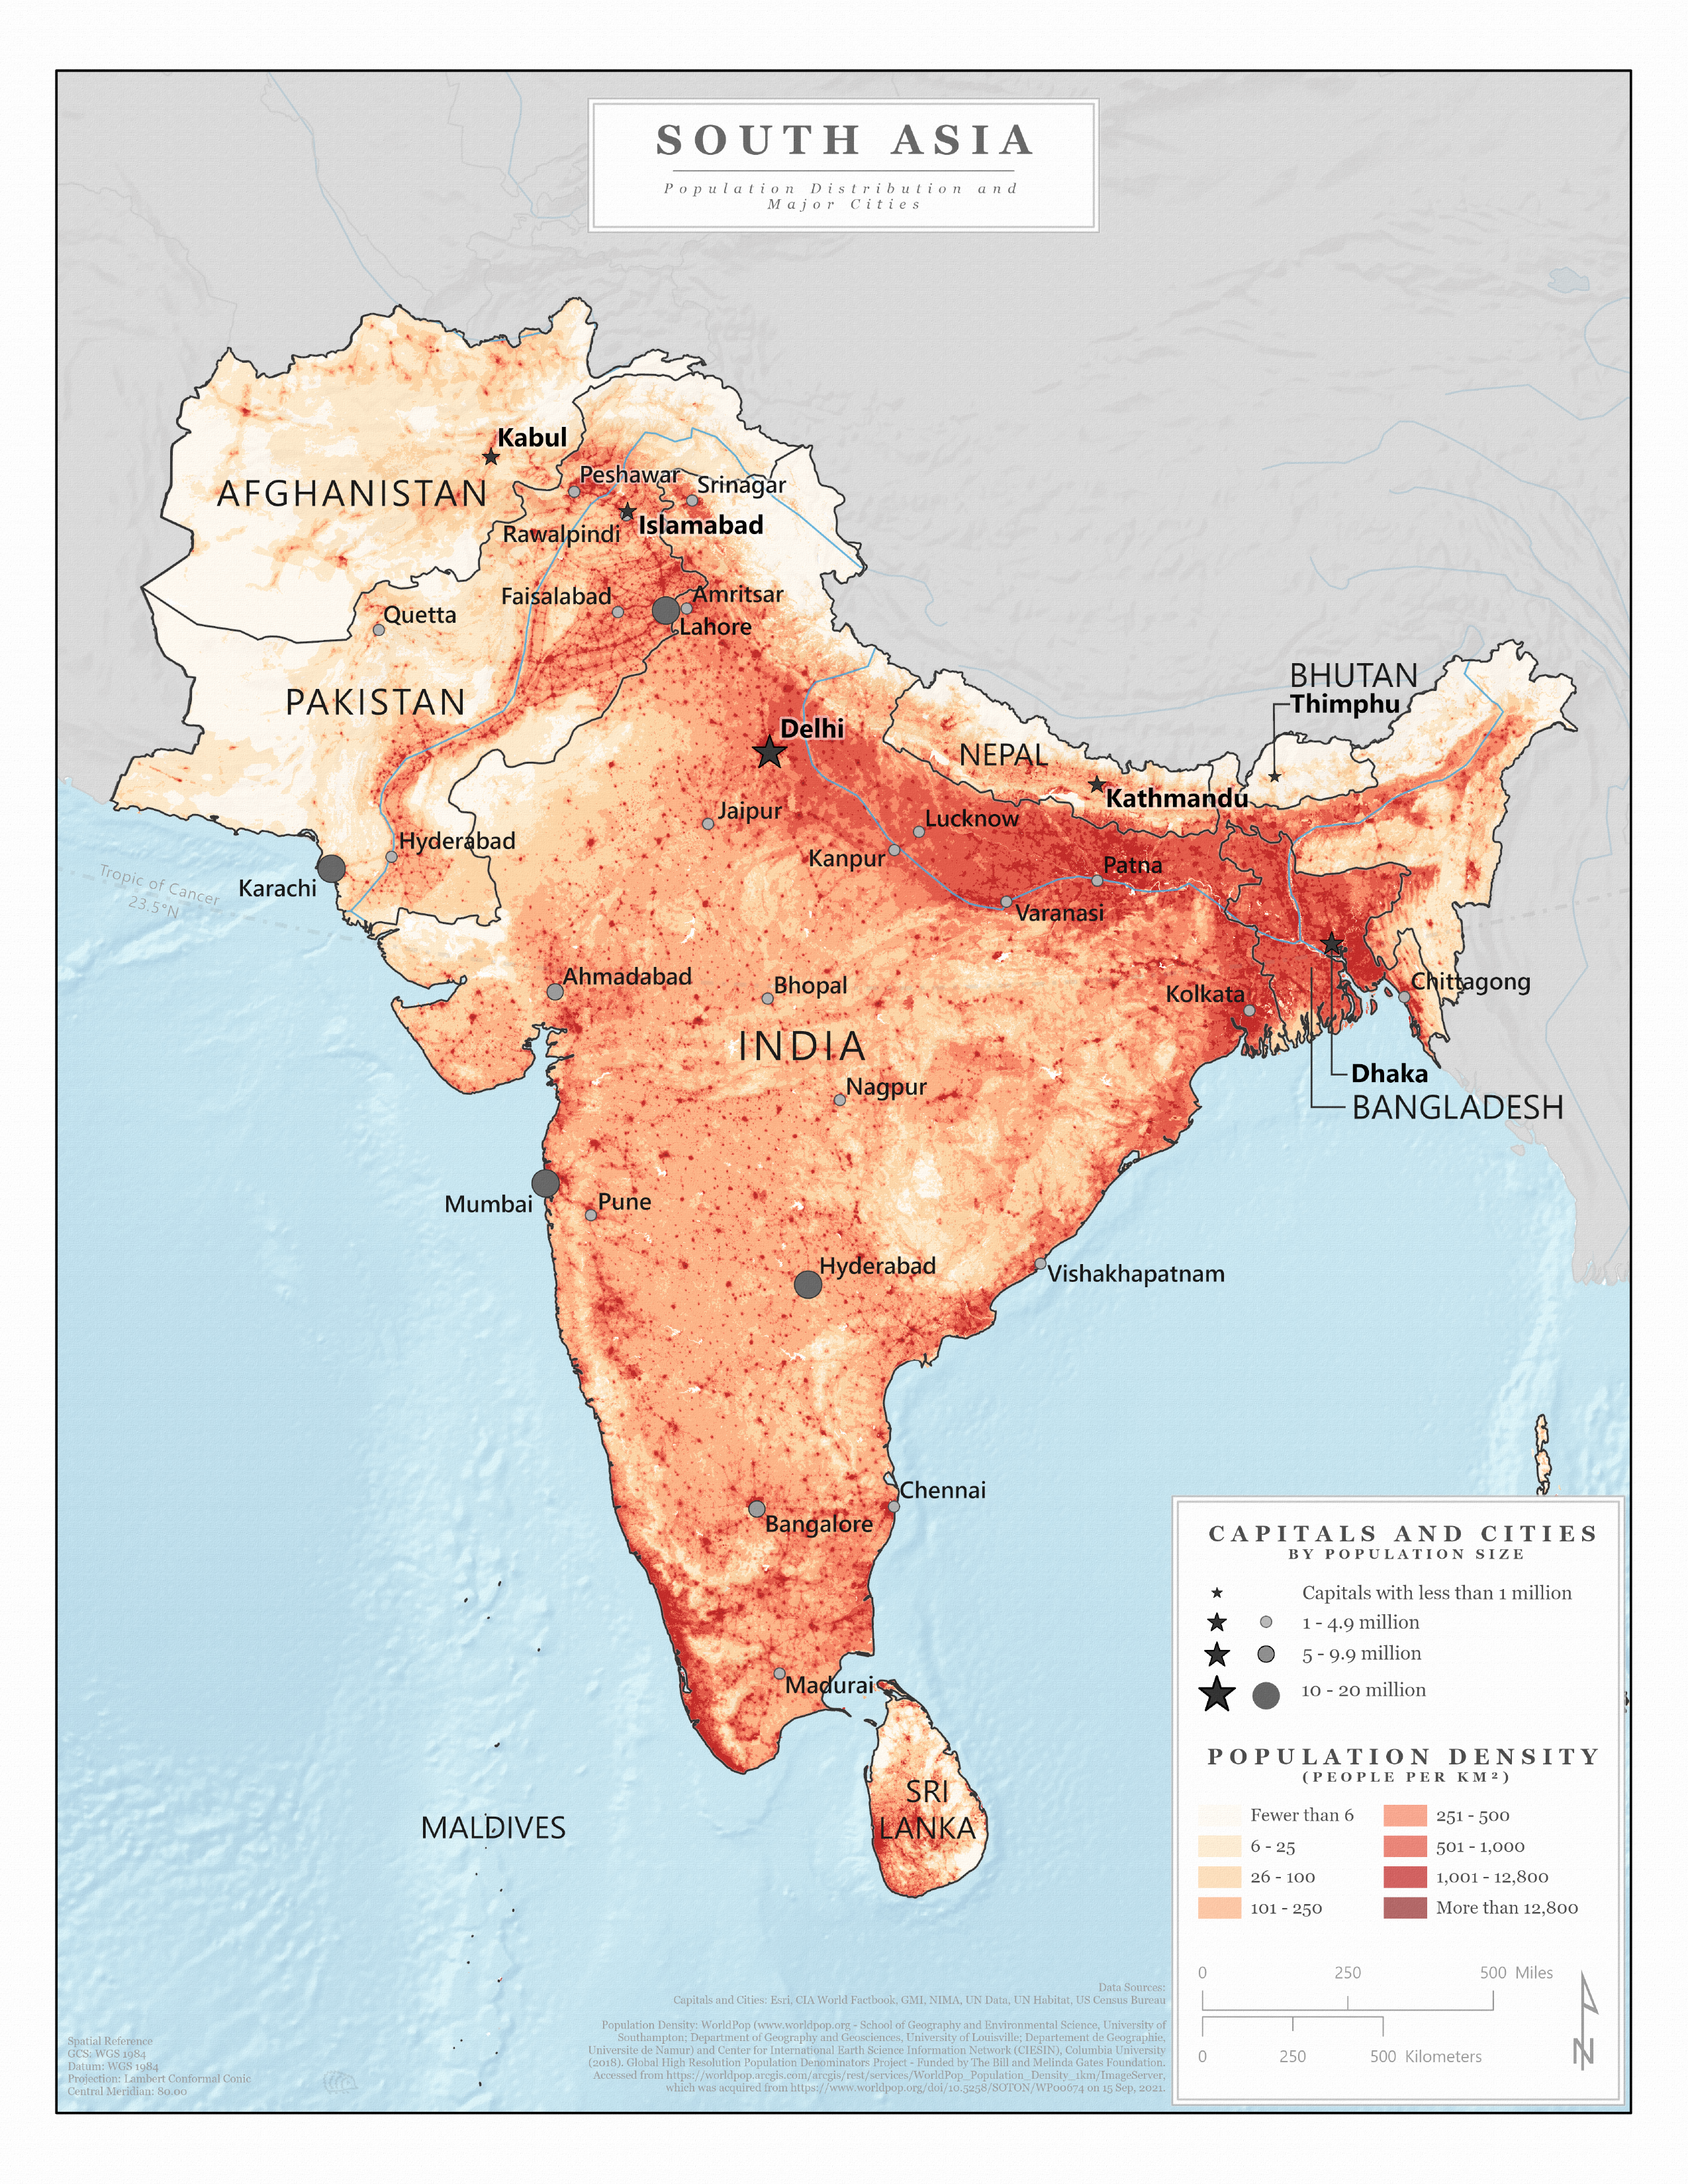 Population distribution and major cities of South Asia